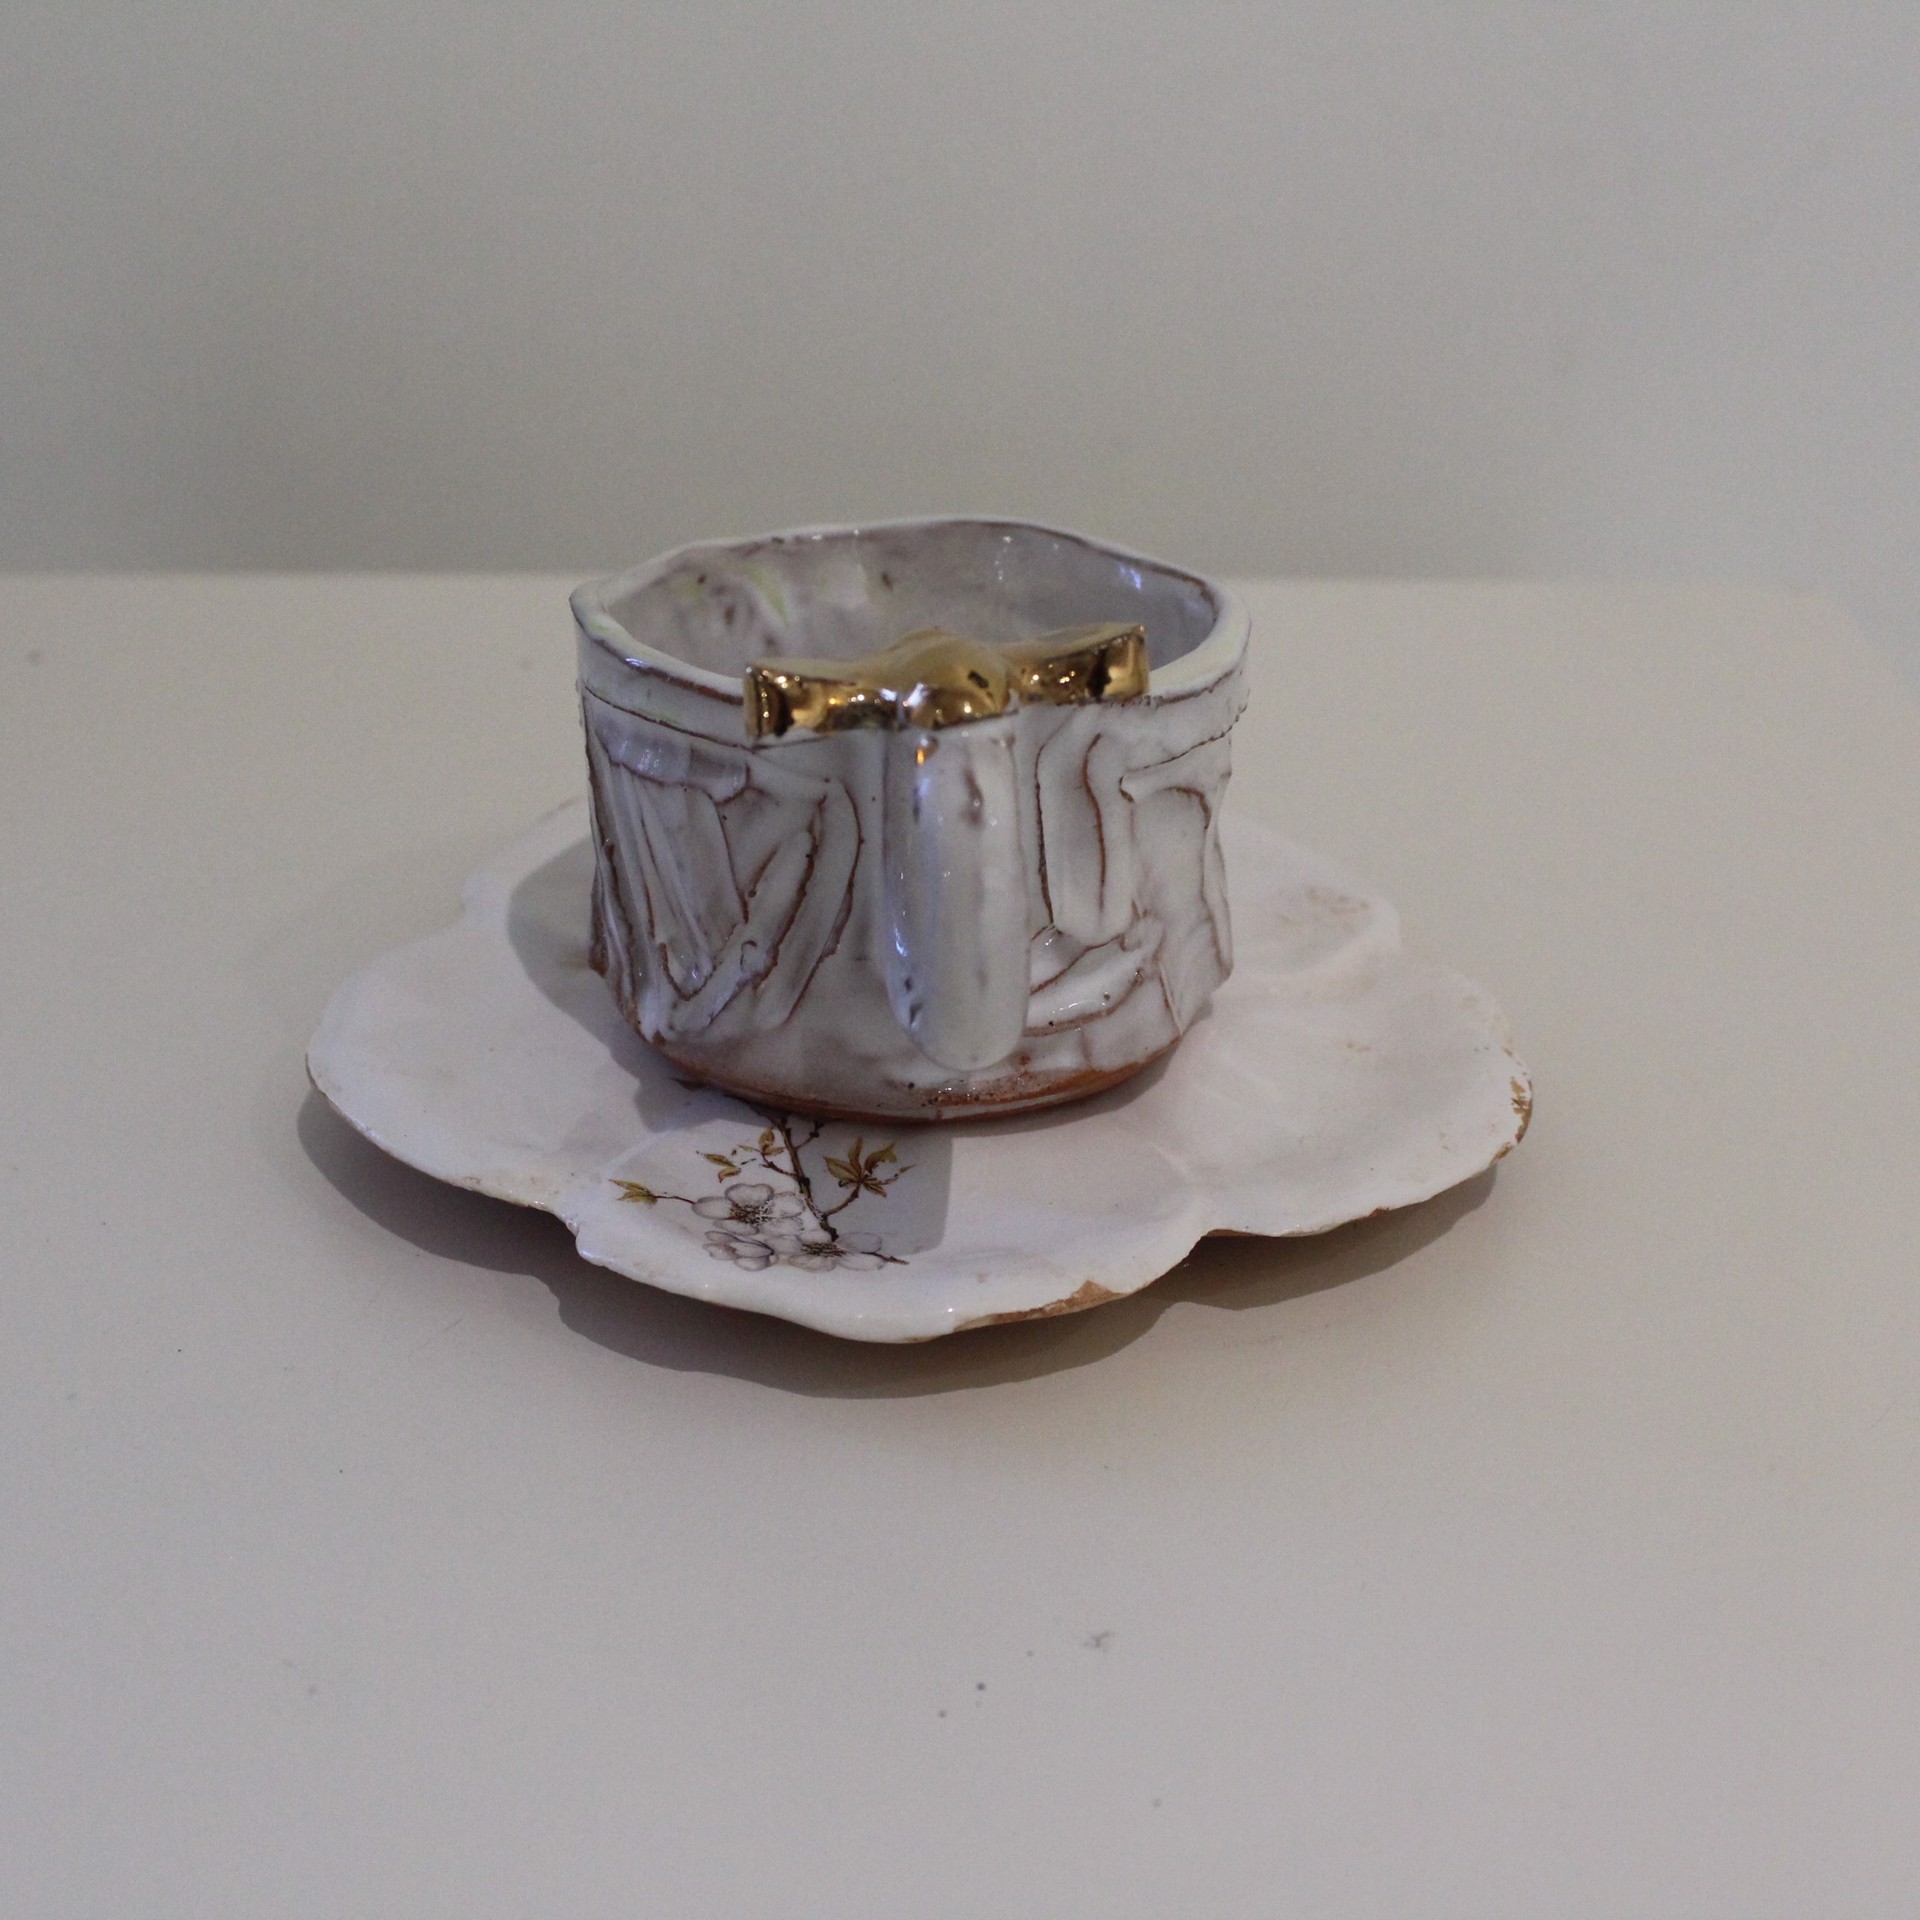 Espresso Cup and Saucer 2 (inspire) by Therese Knowles